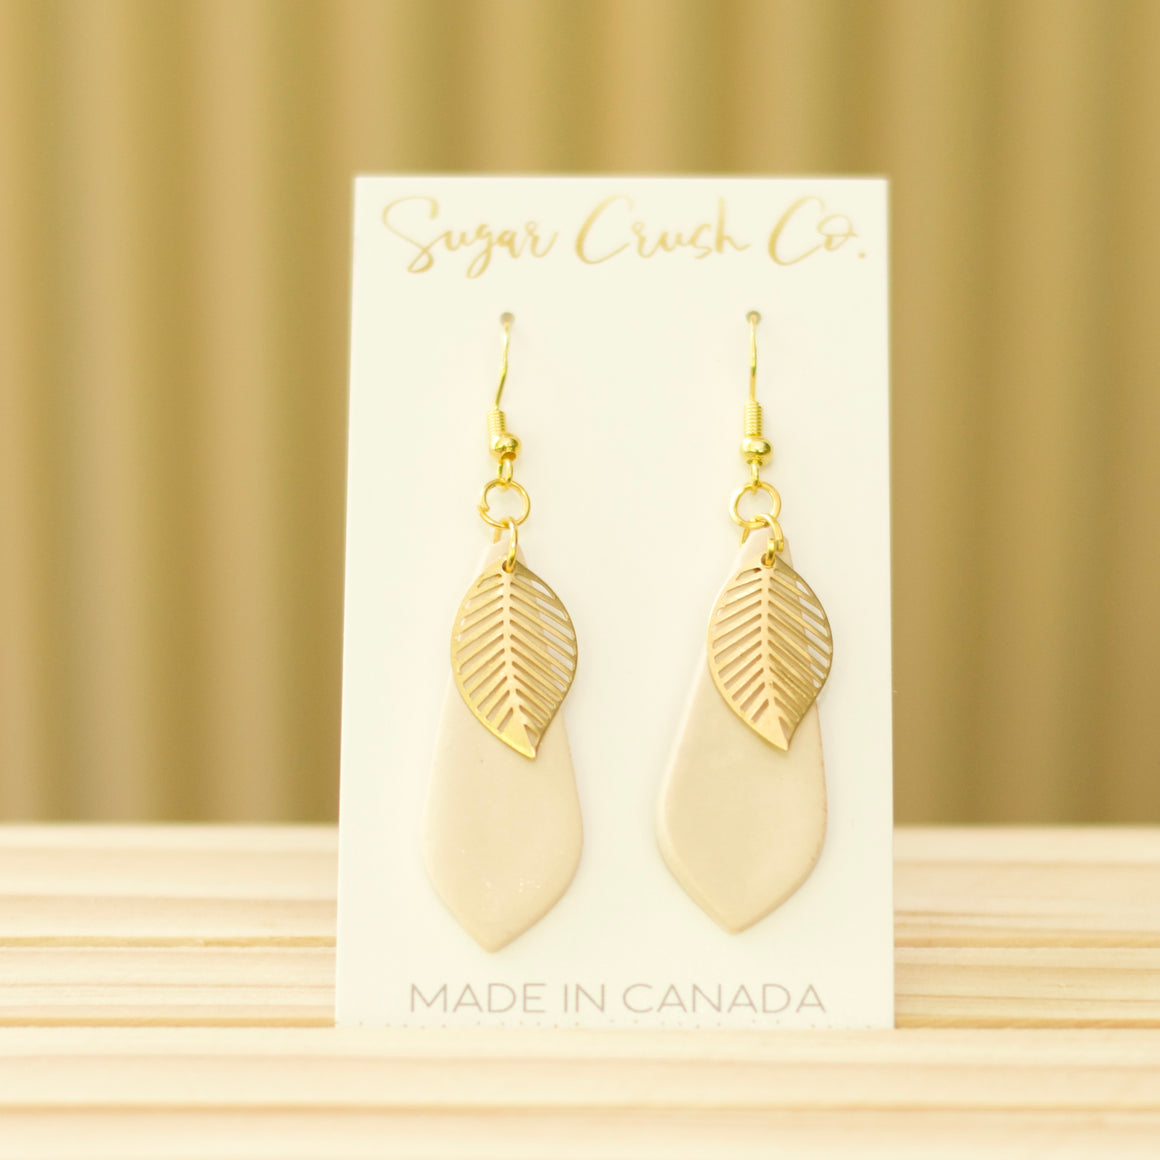 Fall earrings with a teardrop shape and a brass leaf. Handmade in Canada and wholesale is available.